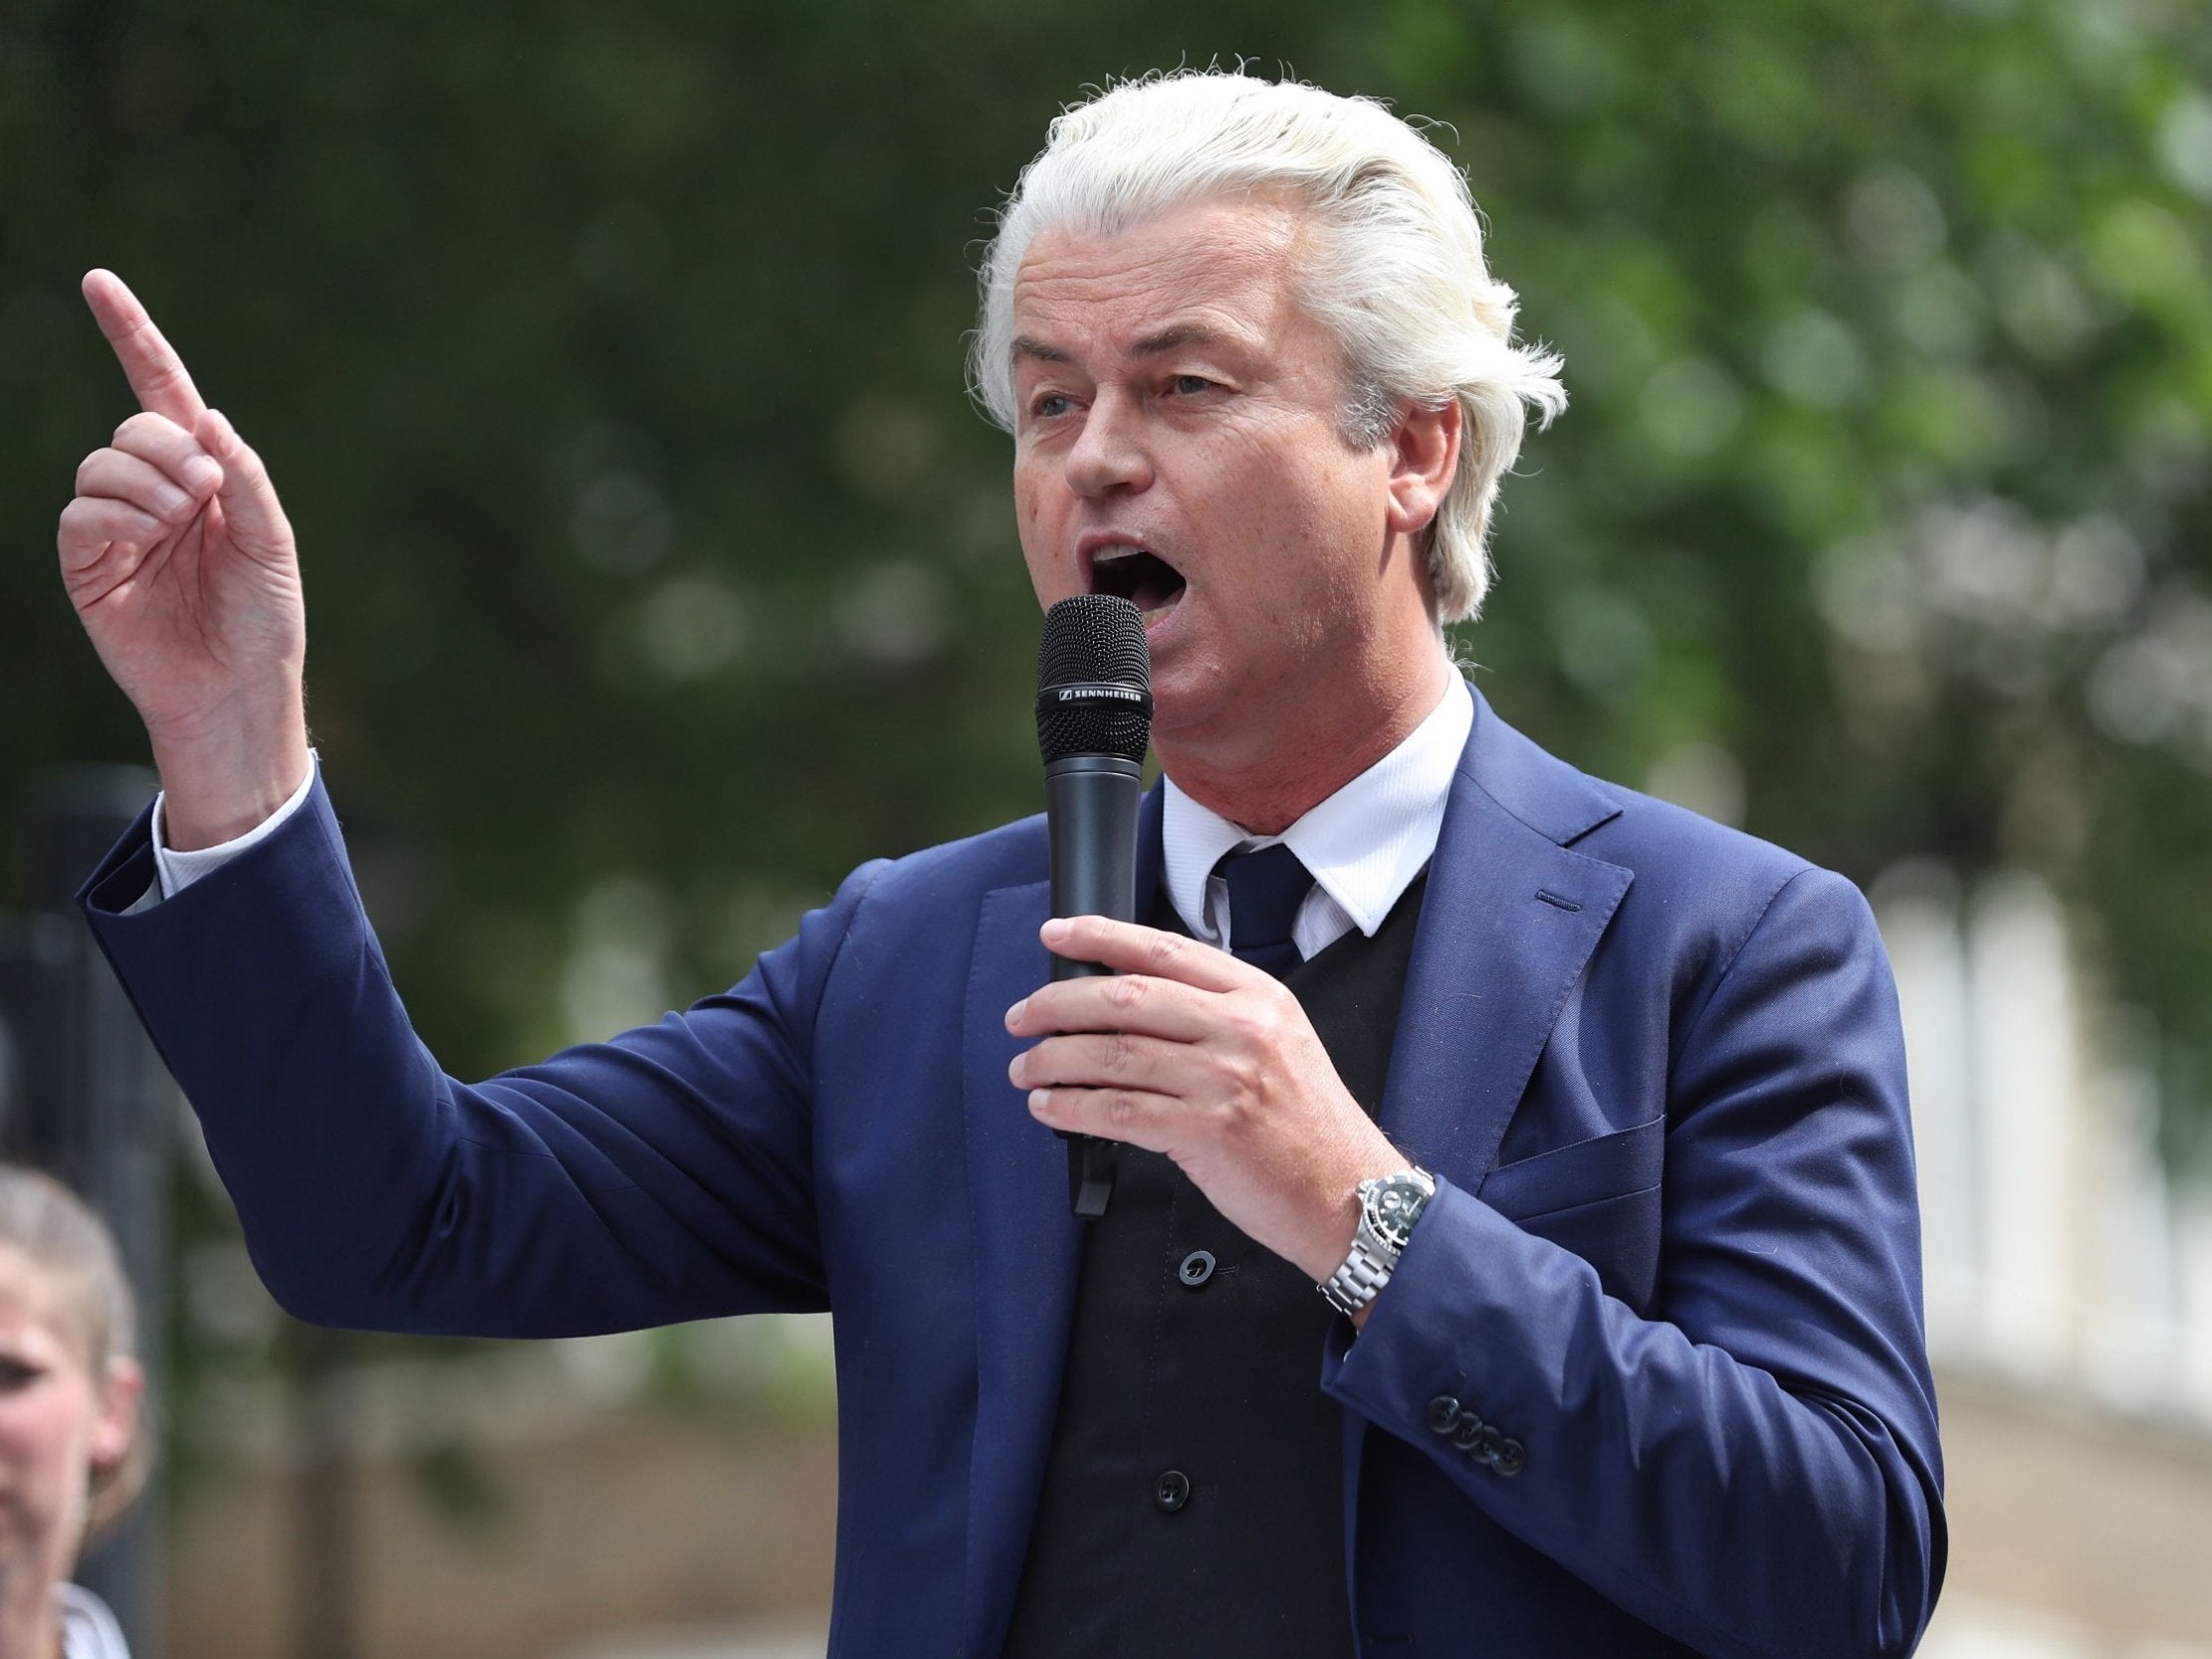 'To avoid the risk of victims of Islamic violence, I have decided not to let the cartoon contest go ahead,' Geert Wilders says